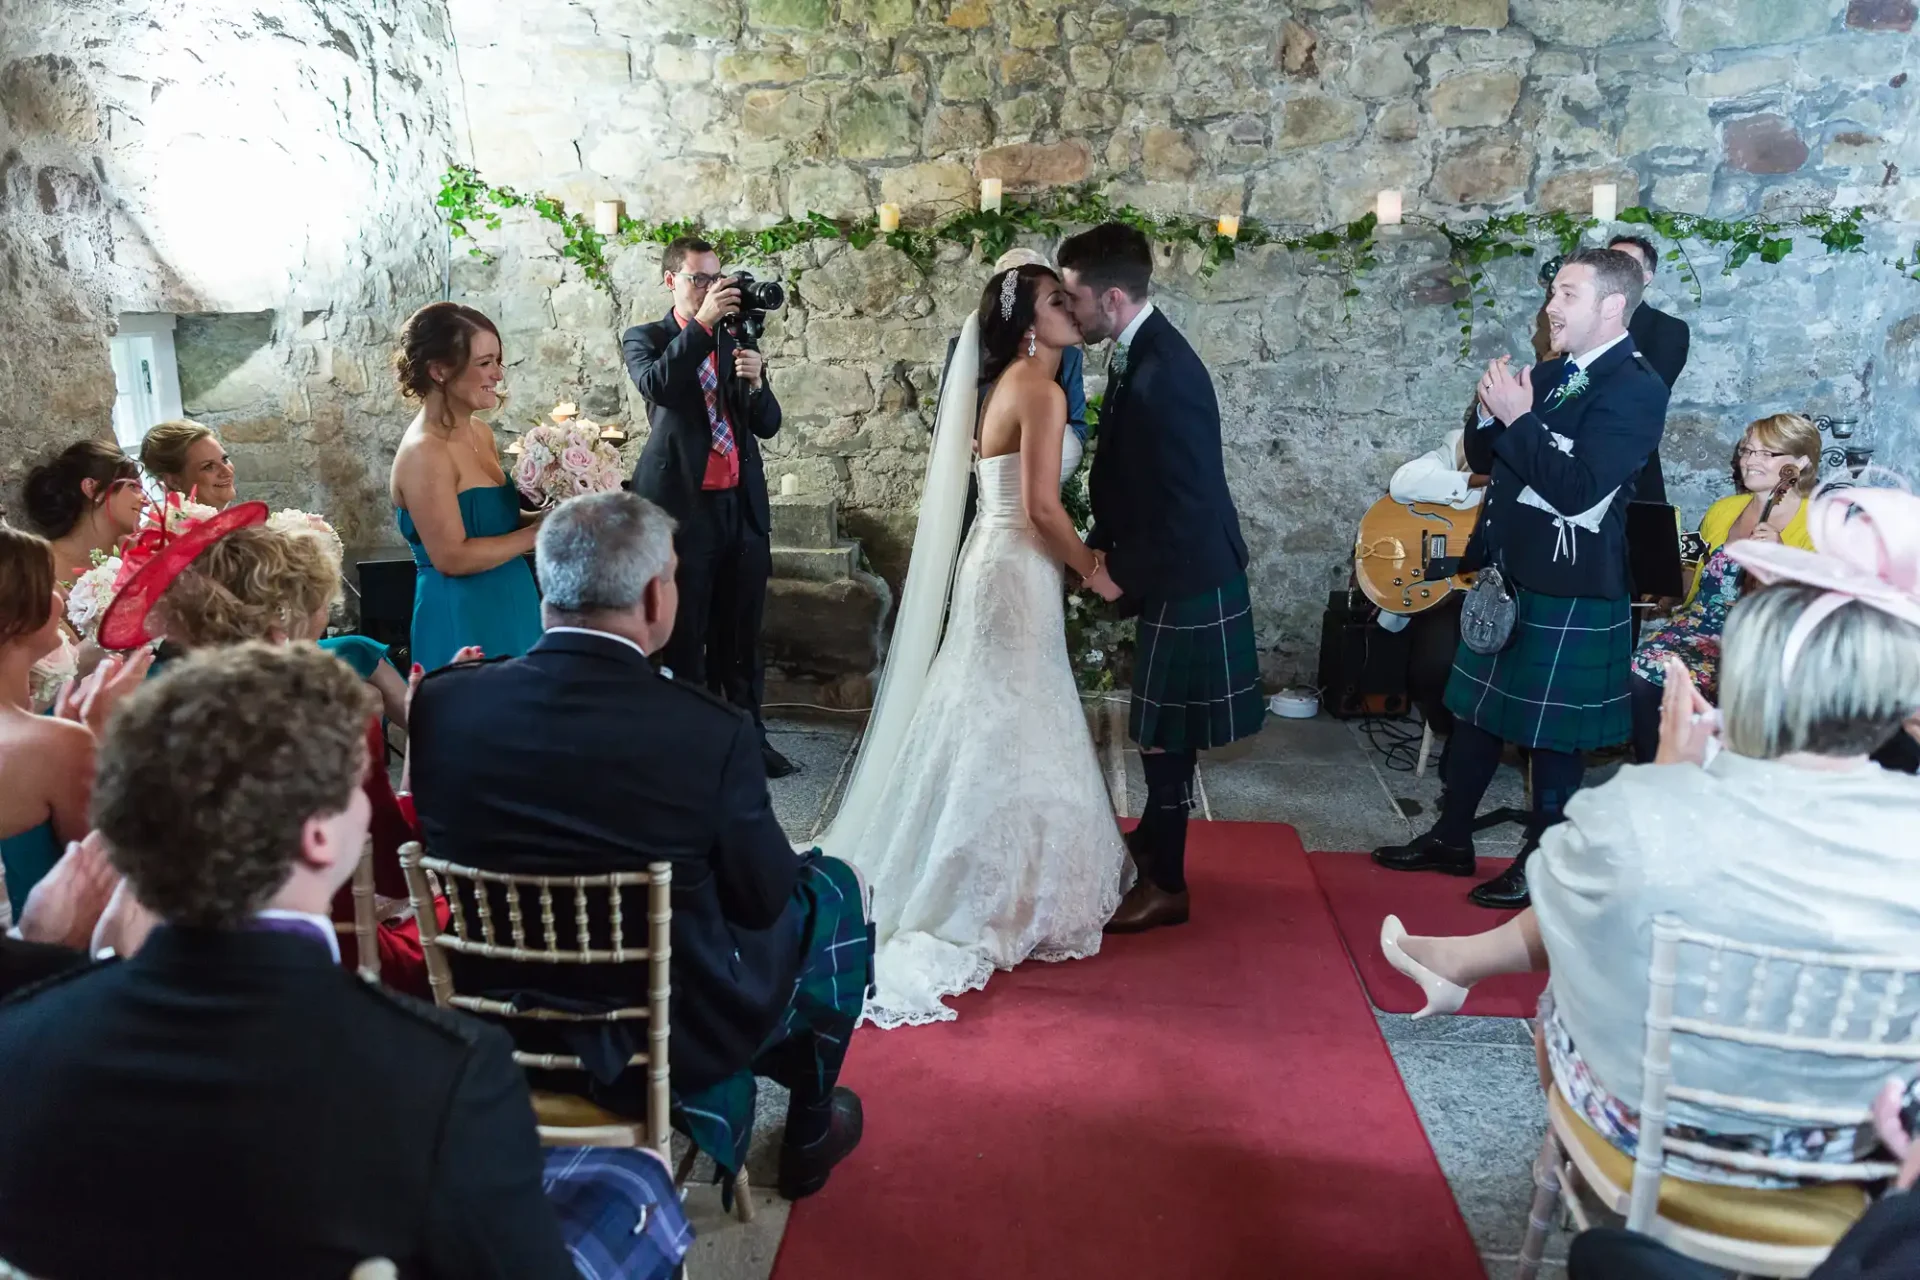 A bride and groom kissing at their wedding ceremony inside a rustic stone building, with guests and a photographer capturing the moment.